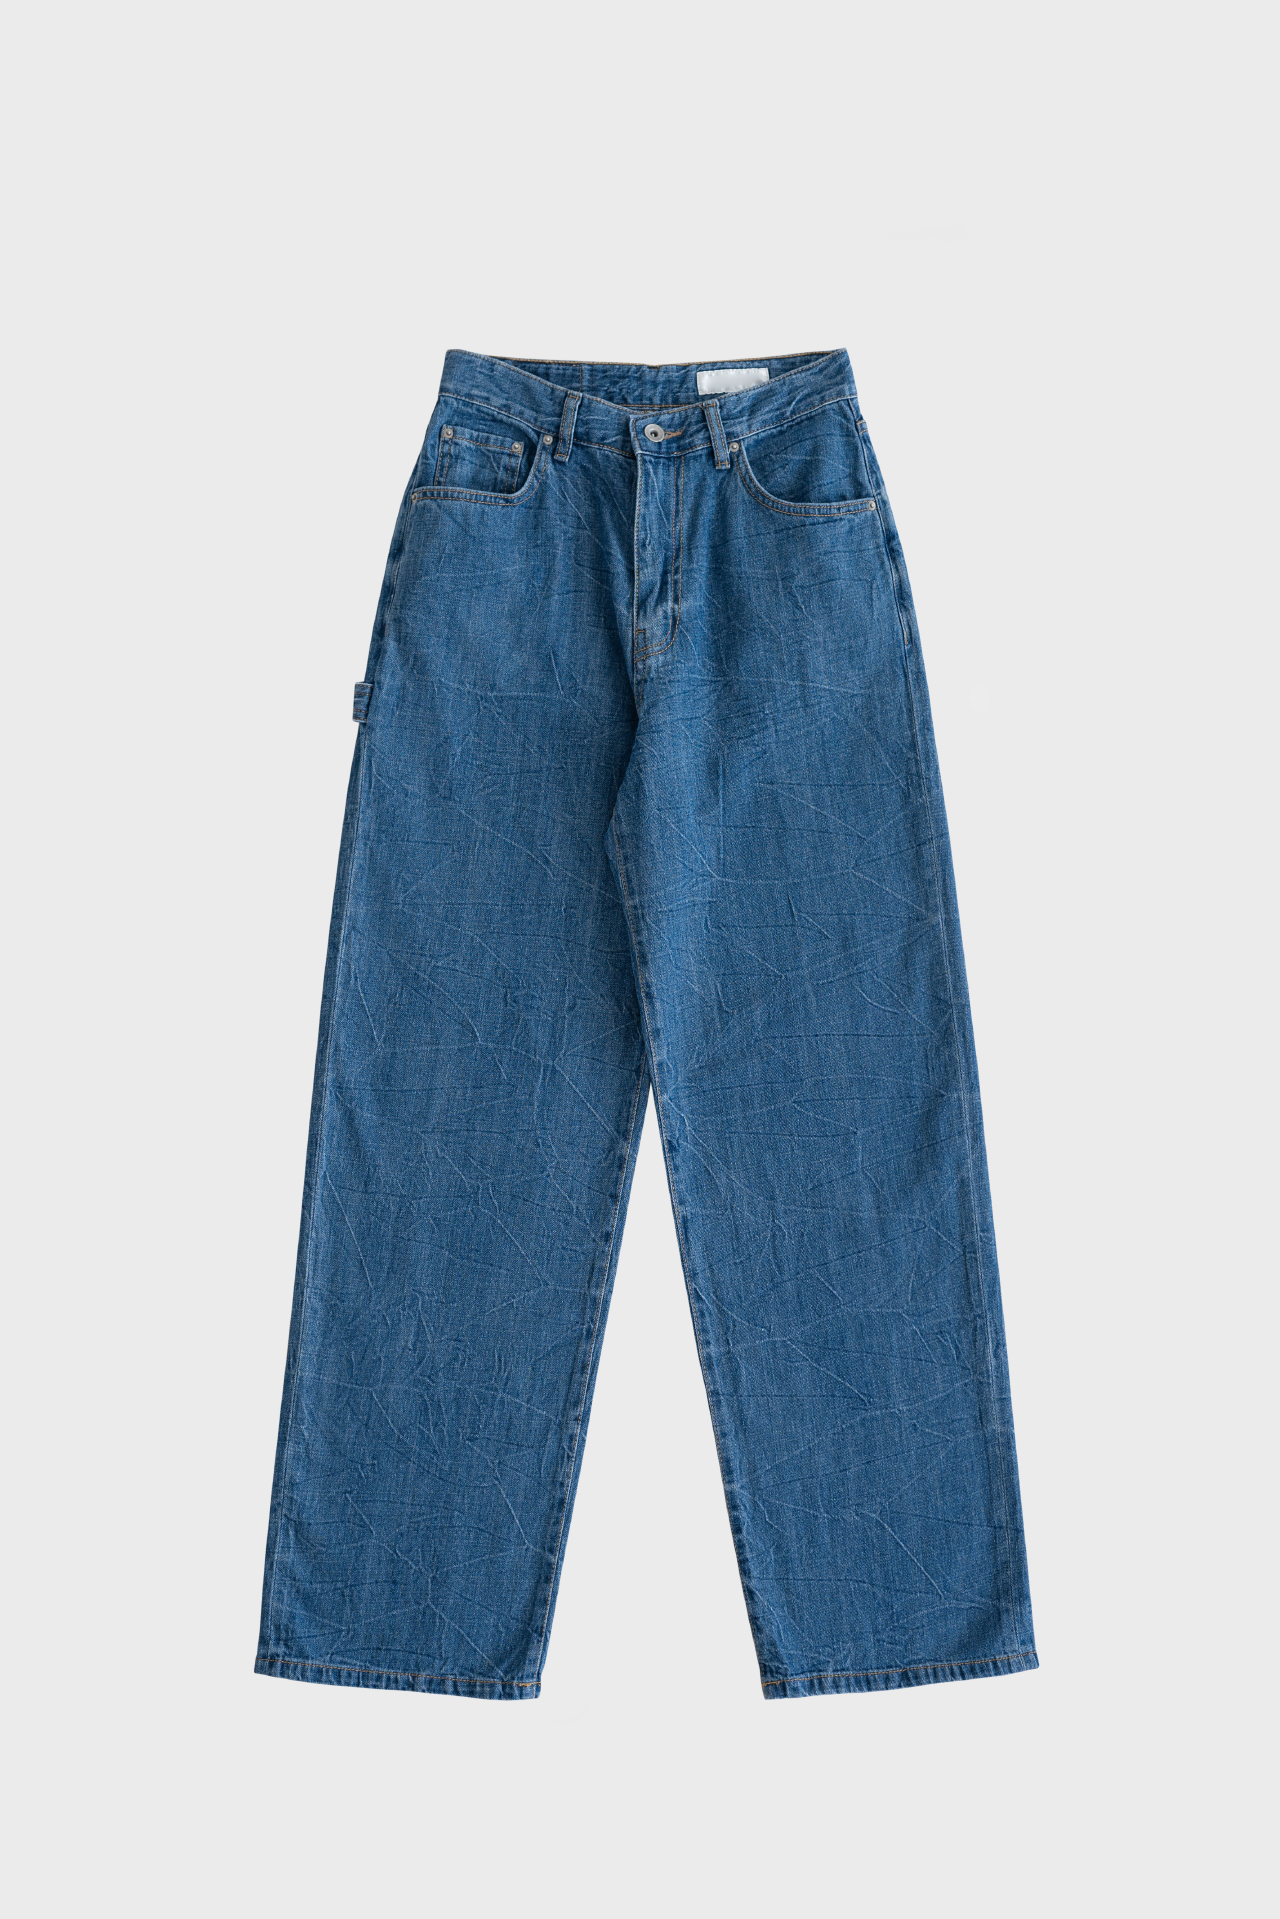 17577_Summer Faded Jeans